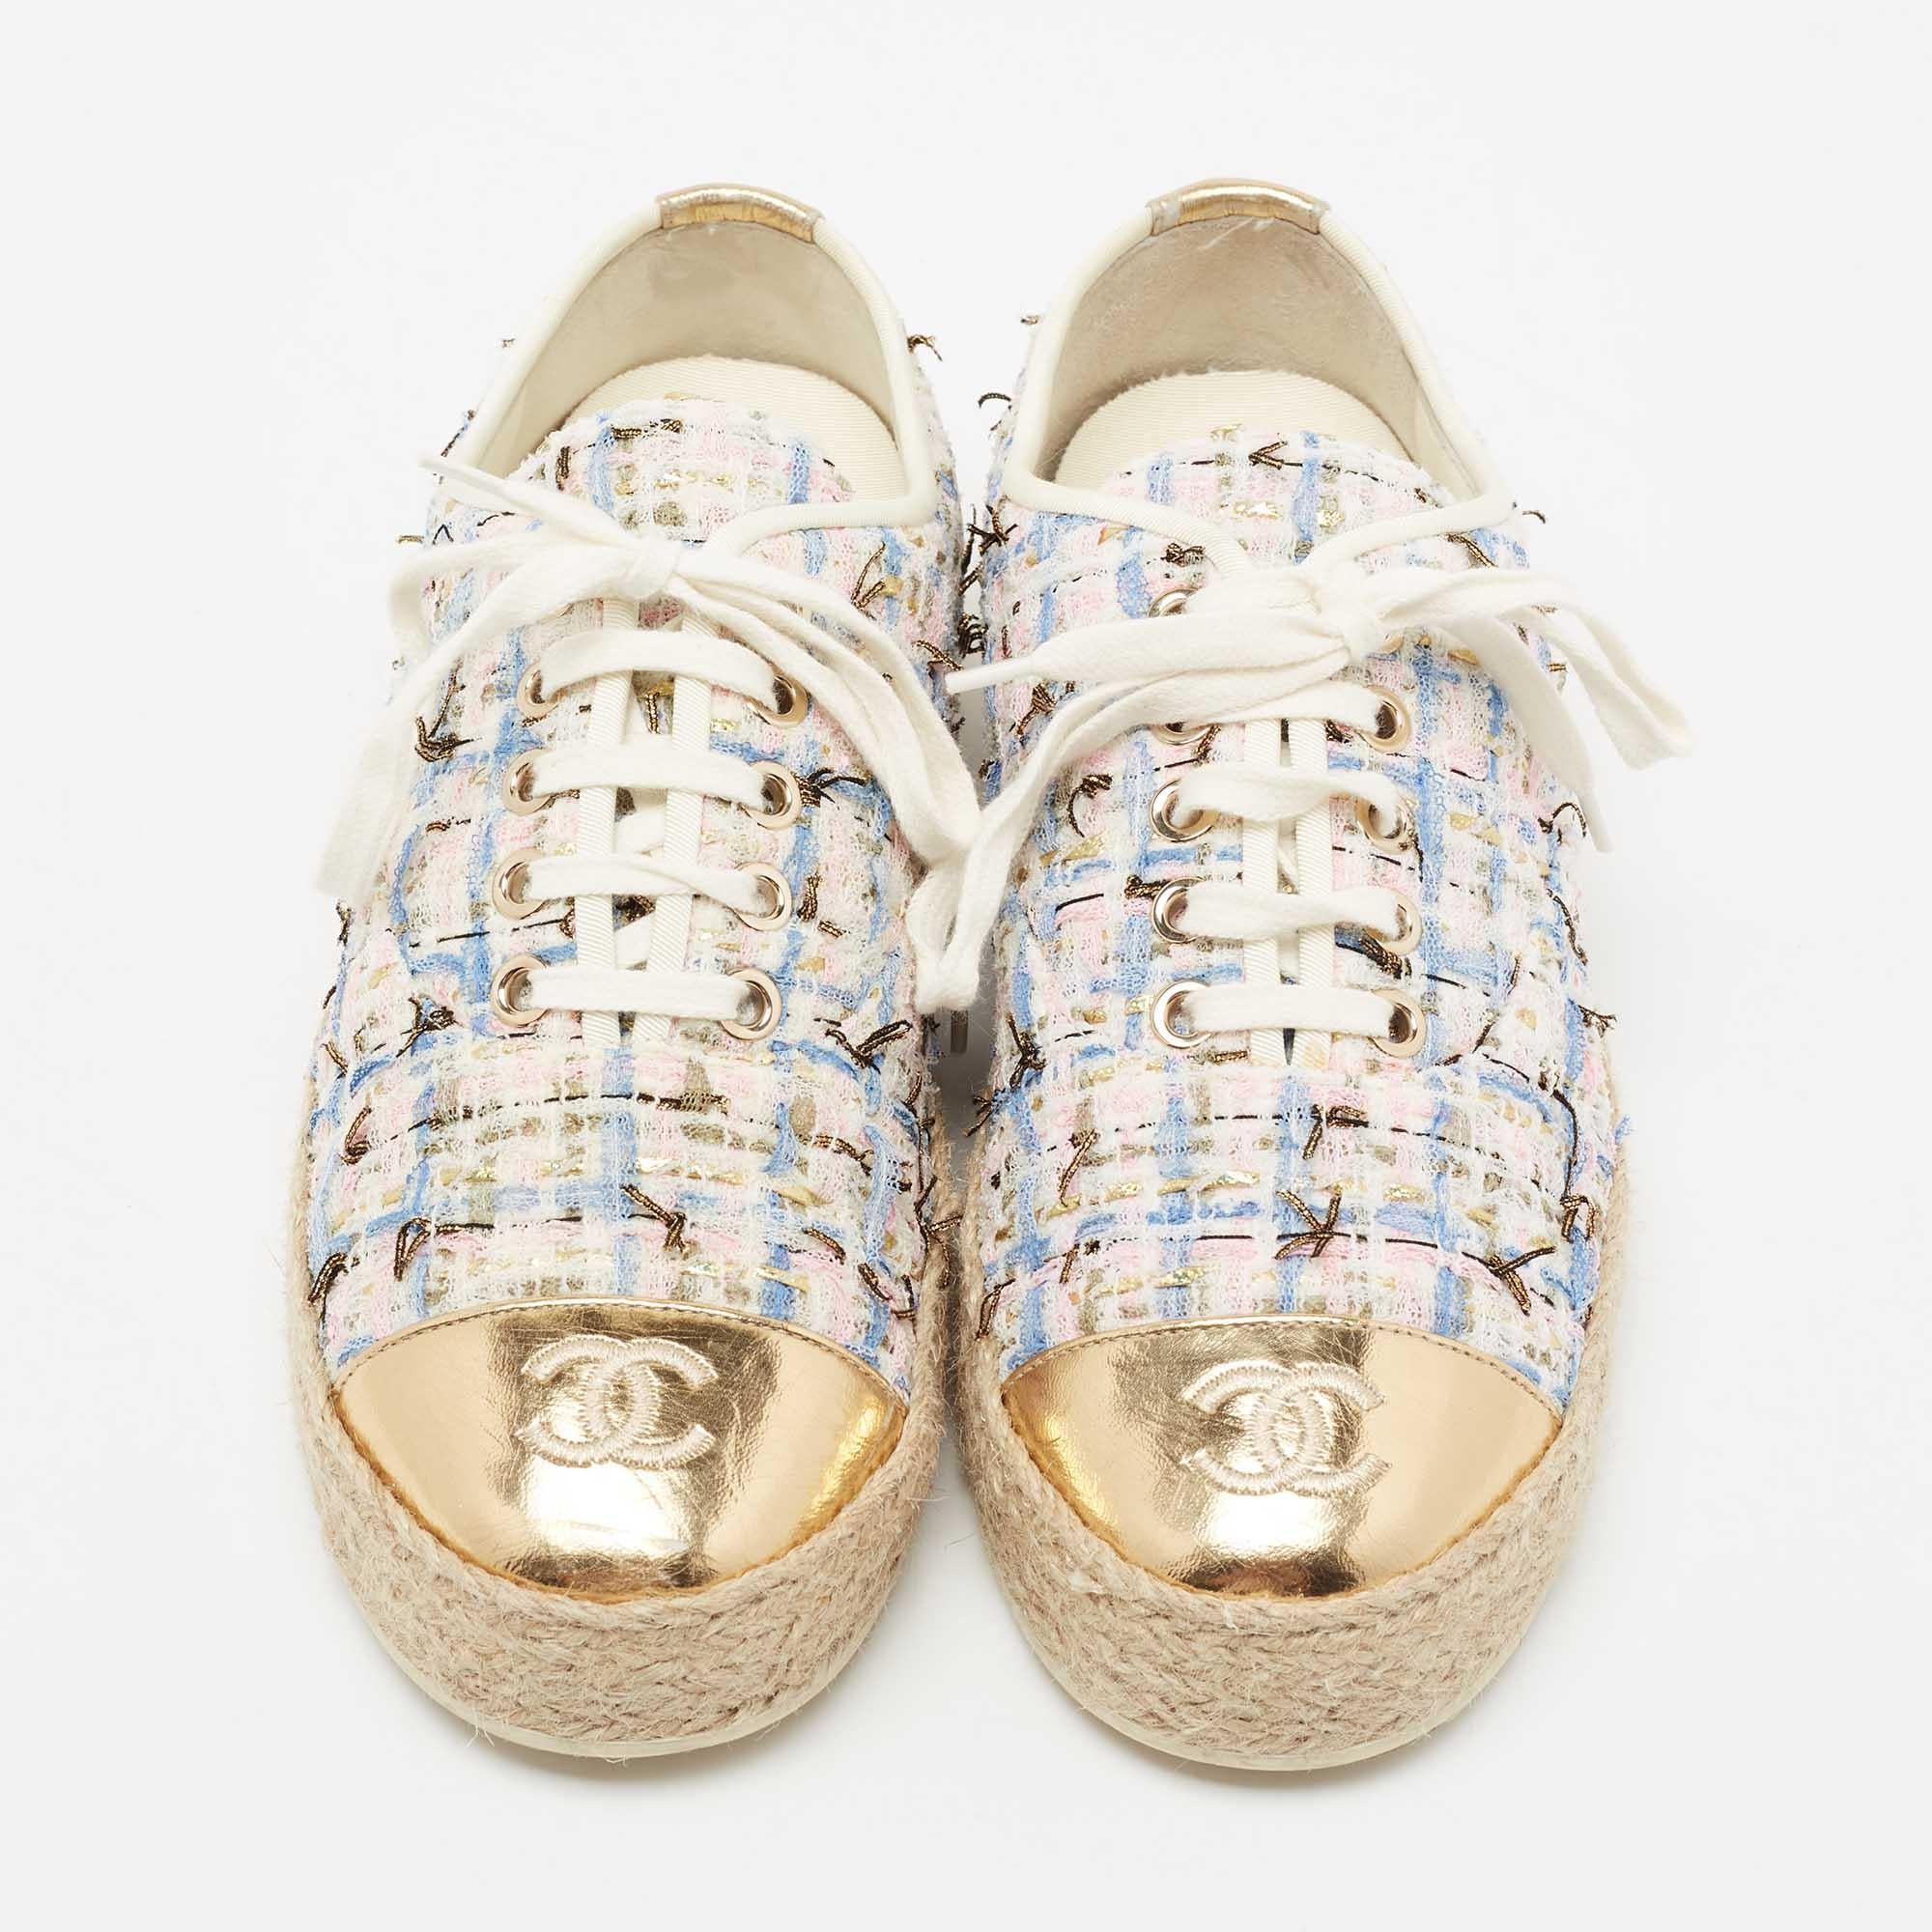 Step out in style with these chic espadrille sneakers from Chanel! These multicolored shoes feature a tweed & foil leather exterior with CC-detailed cap toes, lace-ups, espadrille platforms, and durable rubber soles that offer a comfortable